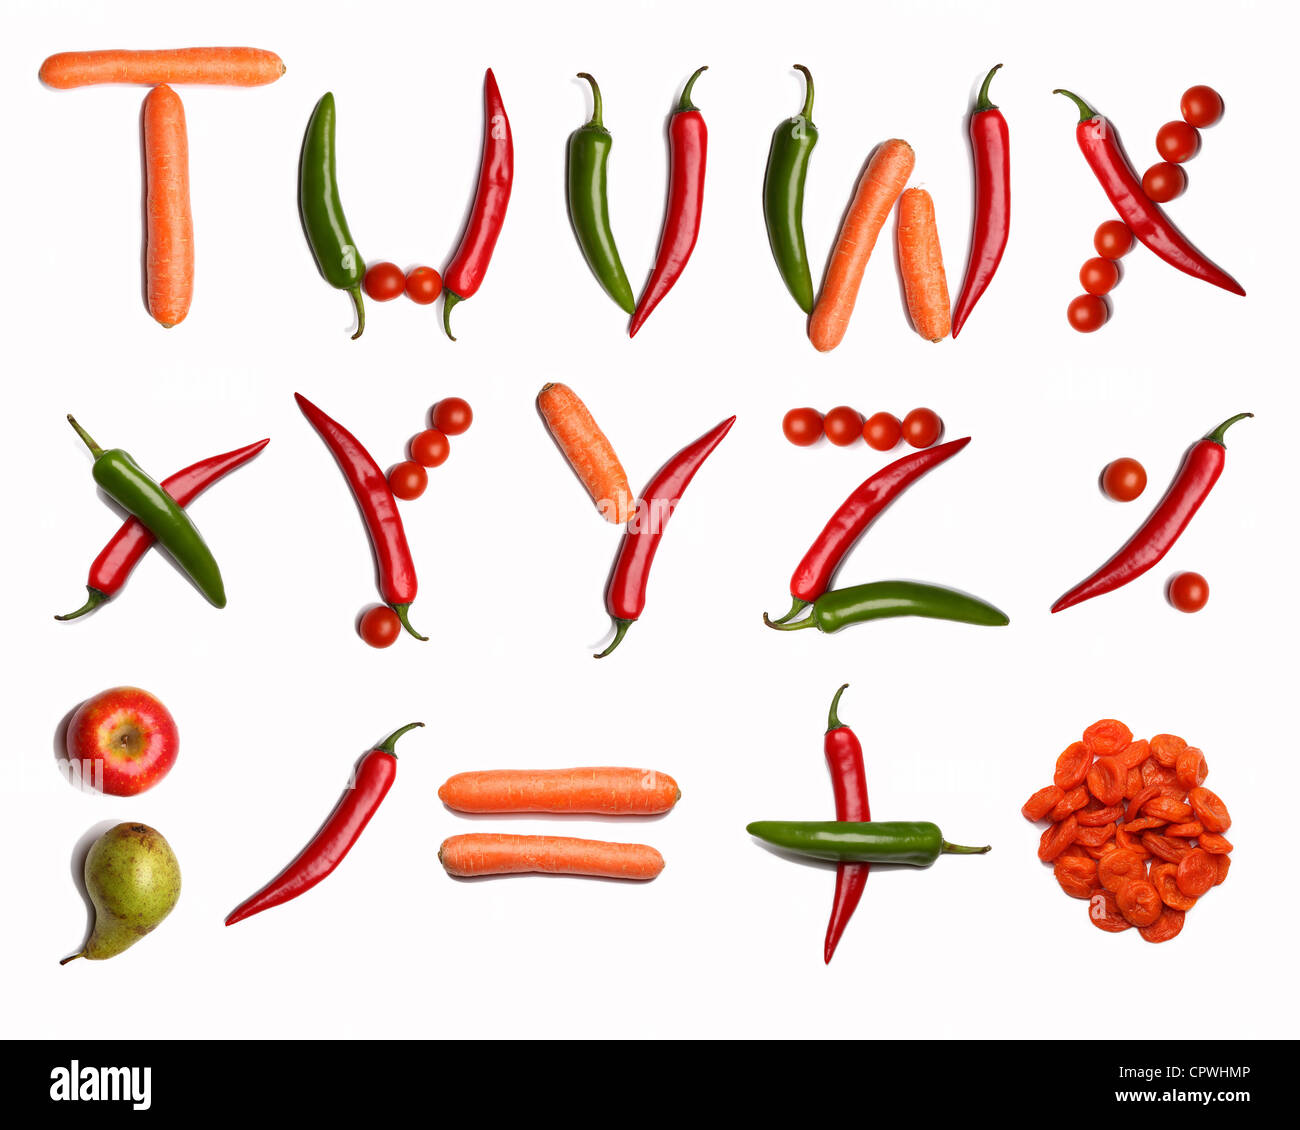 T-U-V-W-X-Y-Z alphabet letters and punctuation marks made with fresh vegetables on the white background (isolated on white) Stock Photo